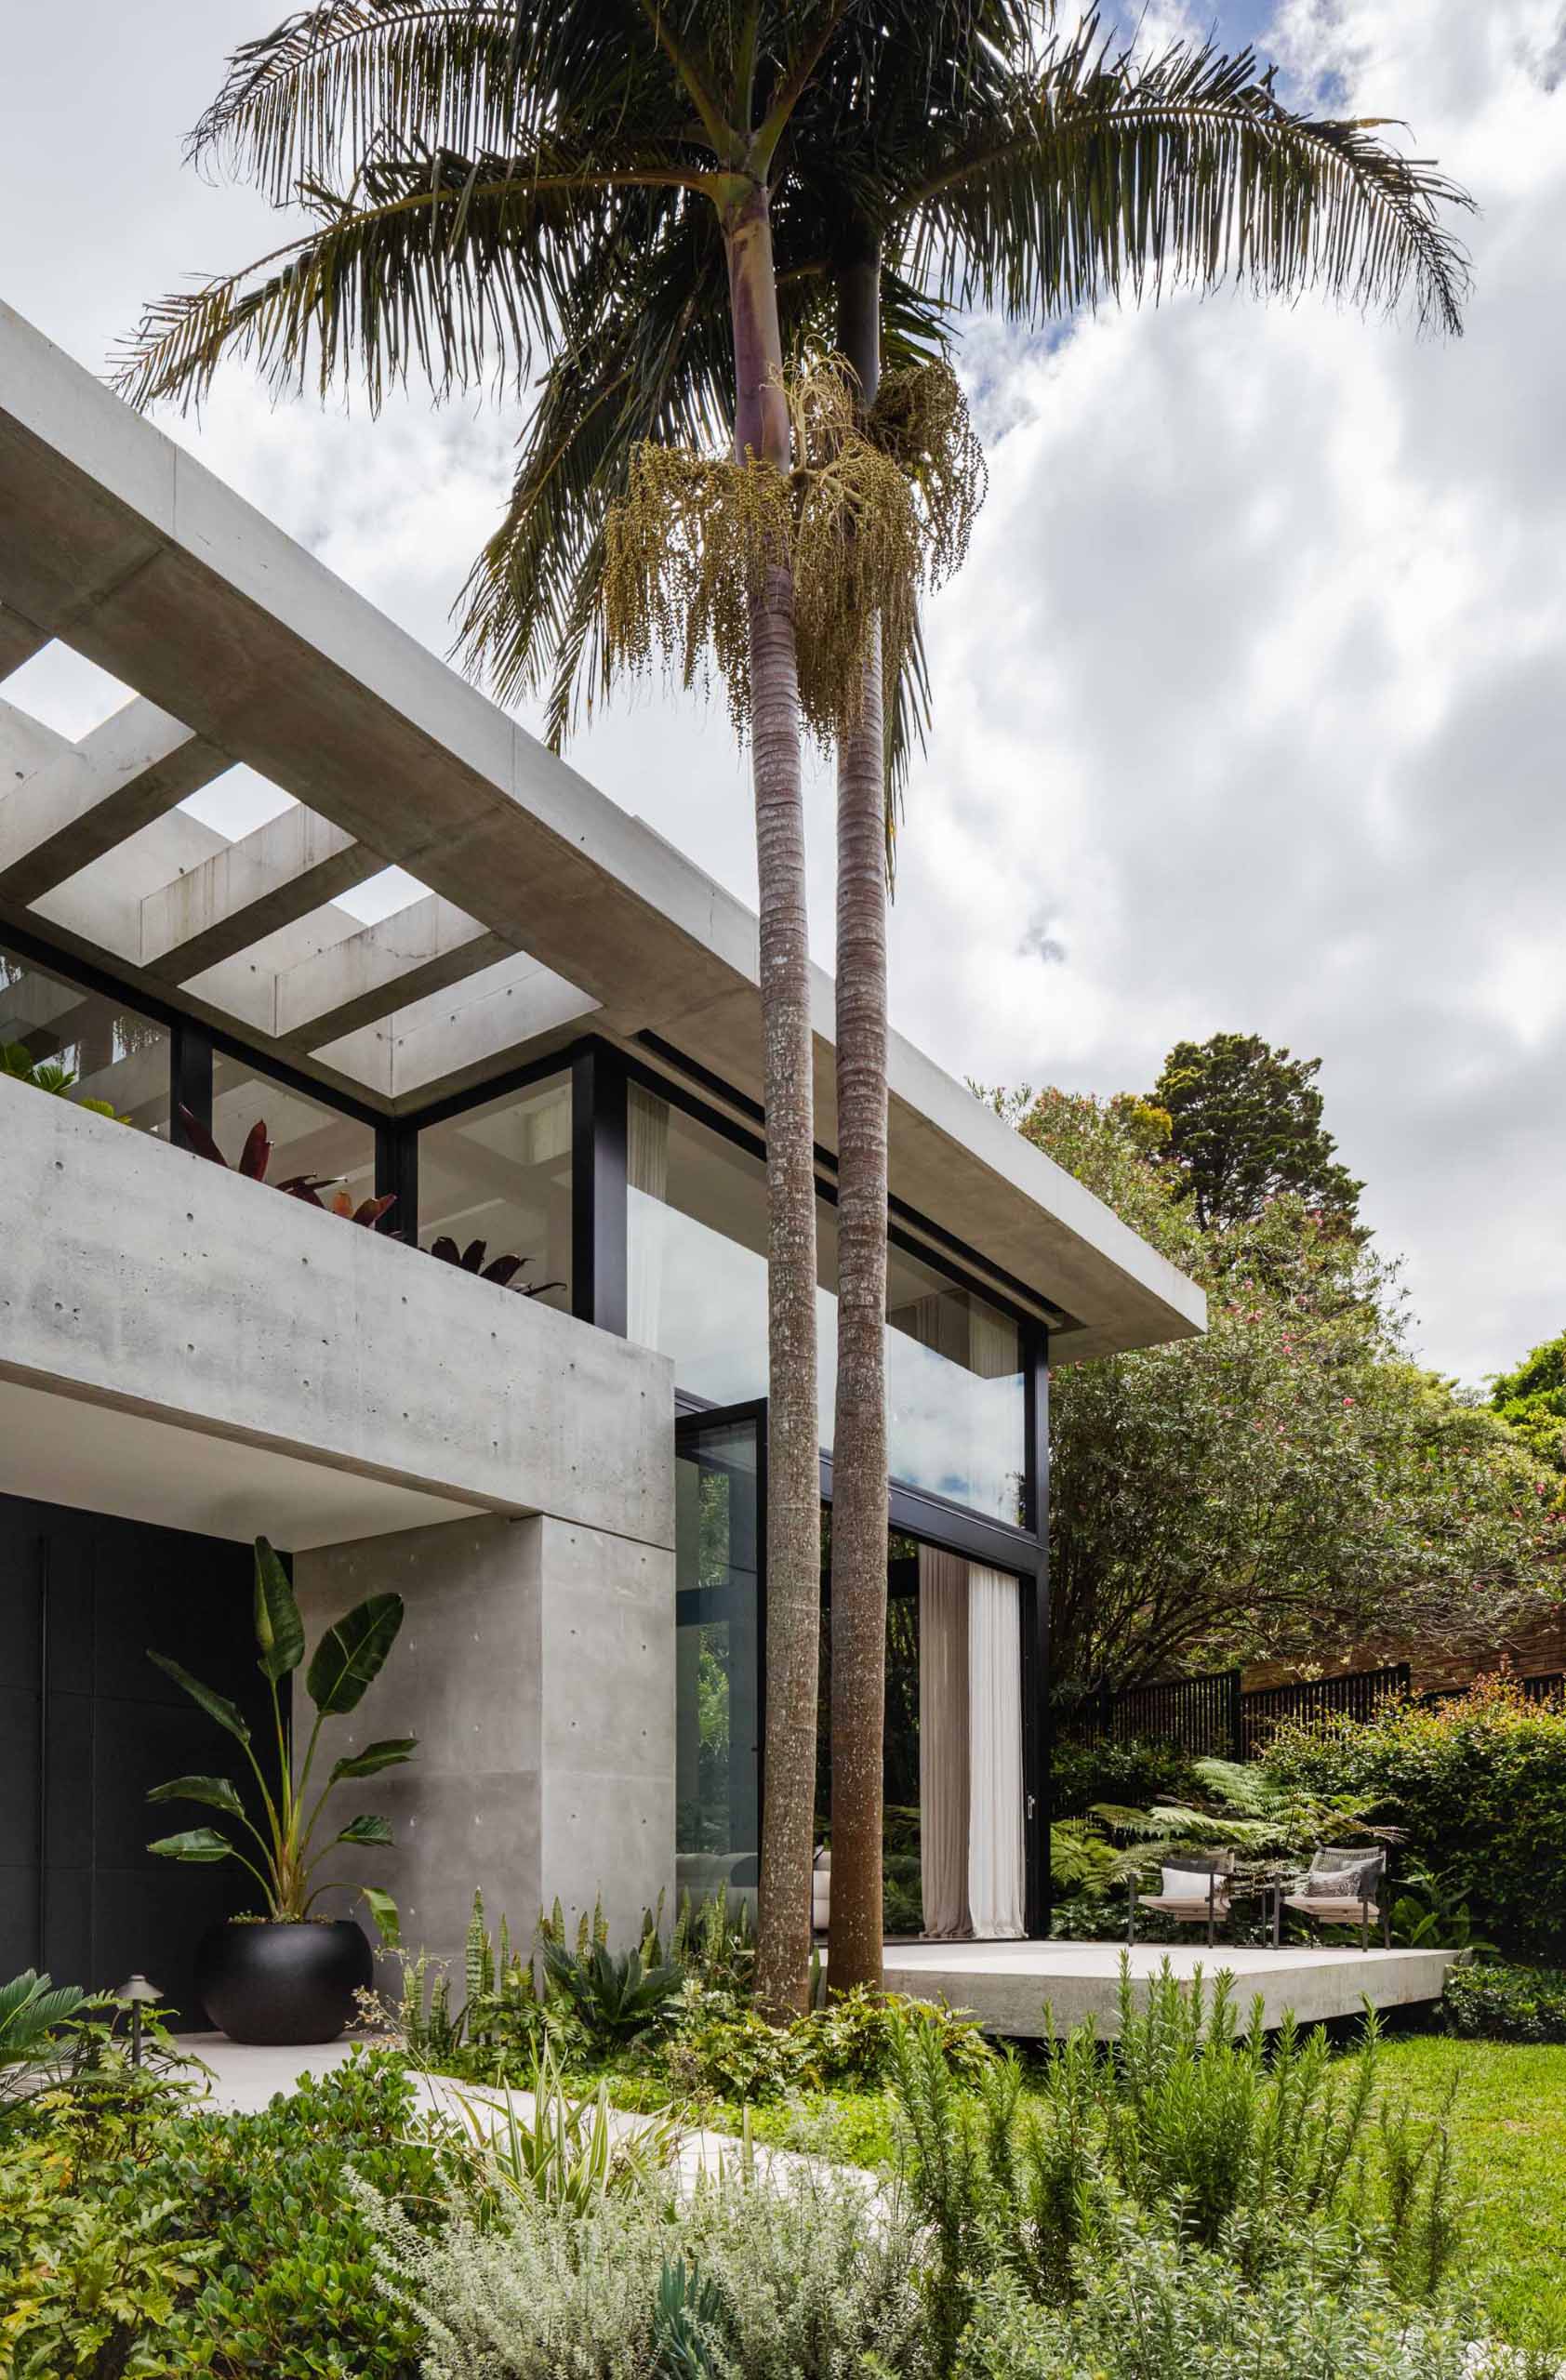 A modern home with a concrete floating deck, which extends under the canopy of the palms, creating a natural connection between the house and front garden.